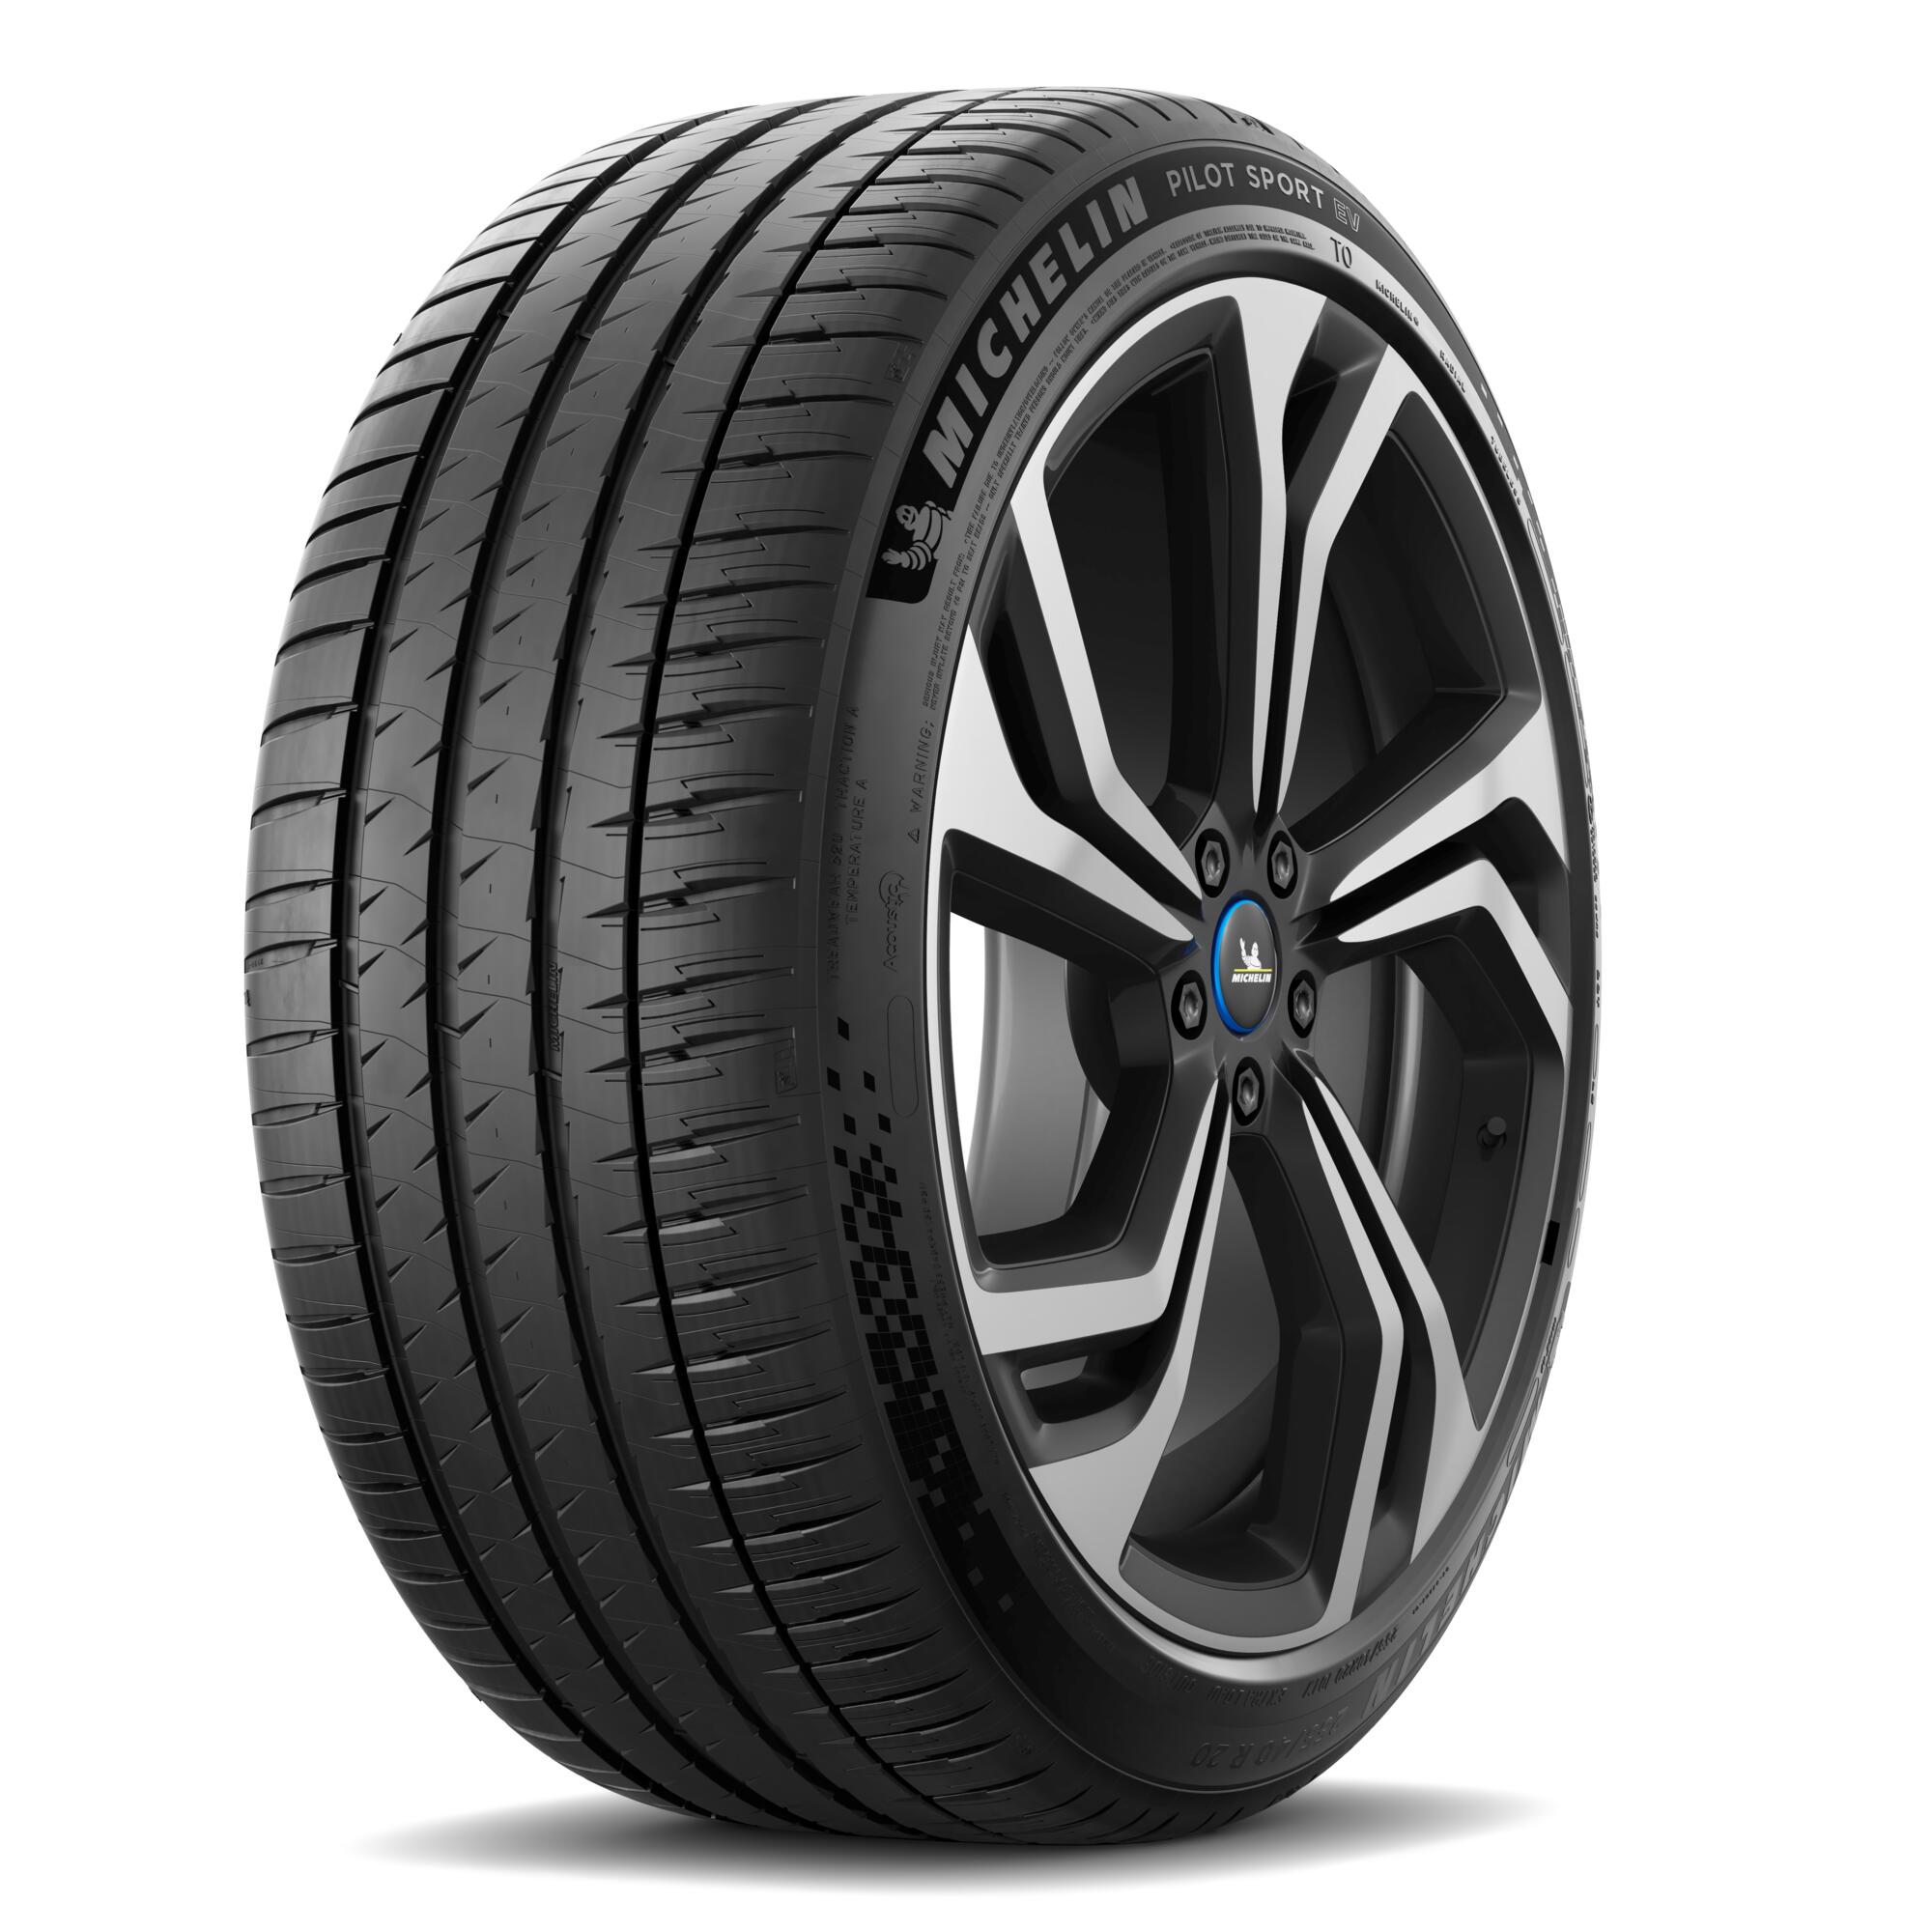 MICHELIN ANNOUNCES LAUNCH OF PILOT SPORT SERIES TYRES FOR MIDDLE EAST AND NORTH AFRICA